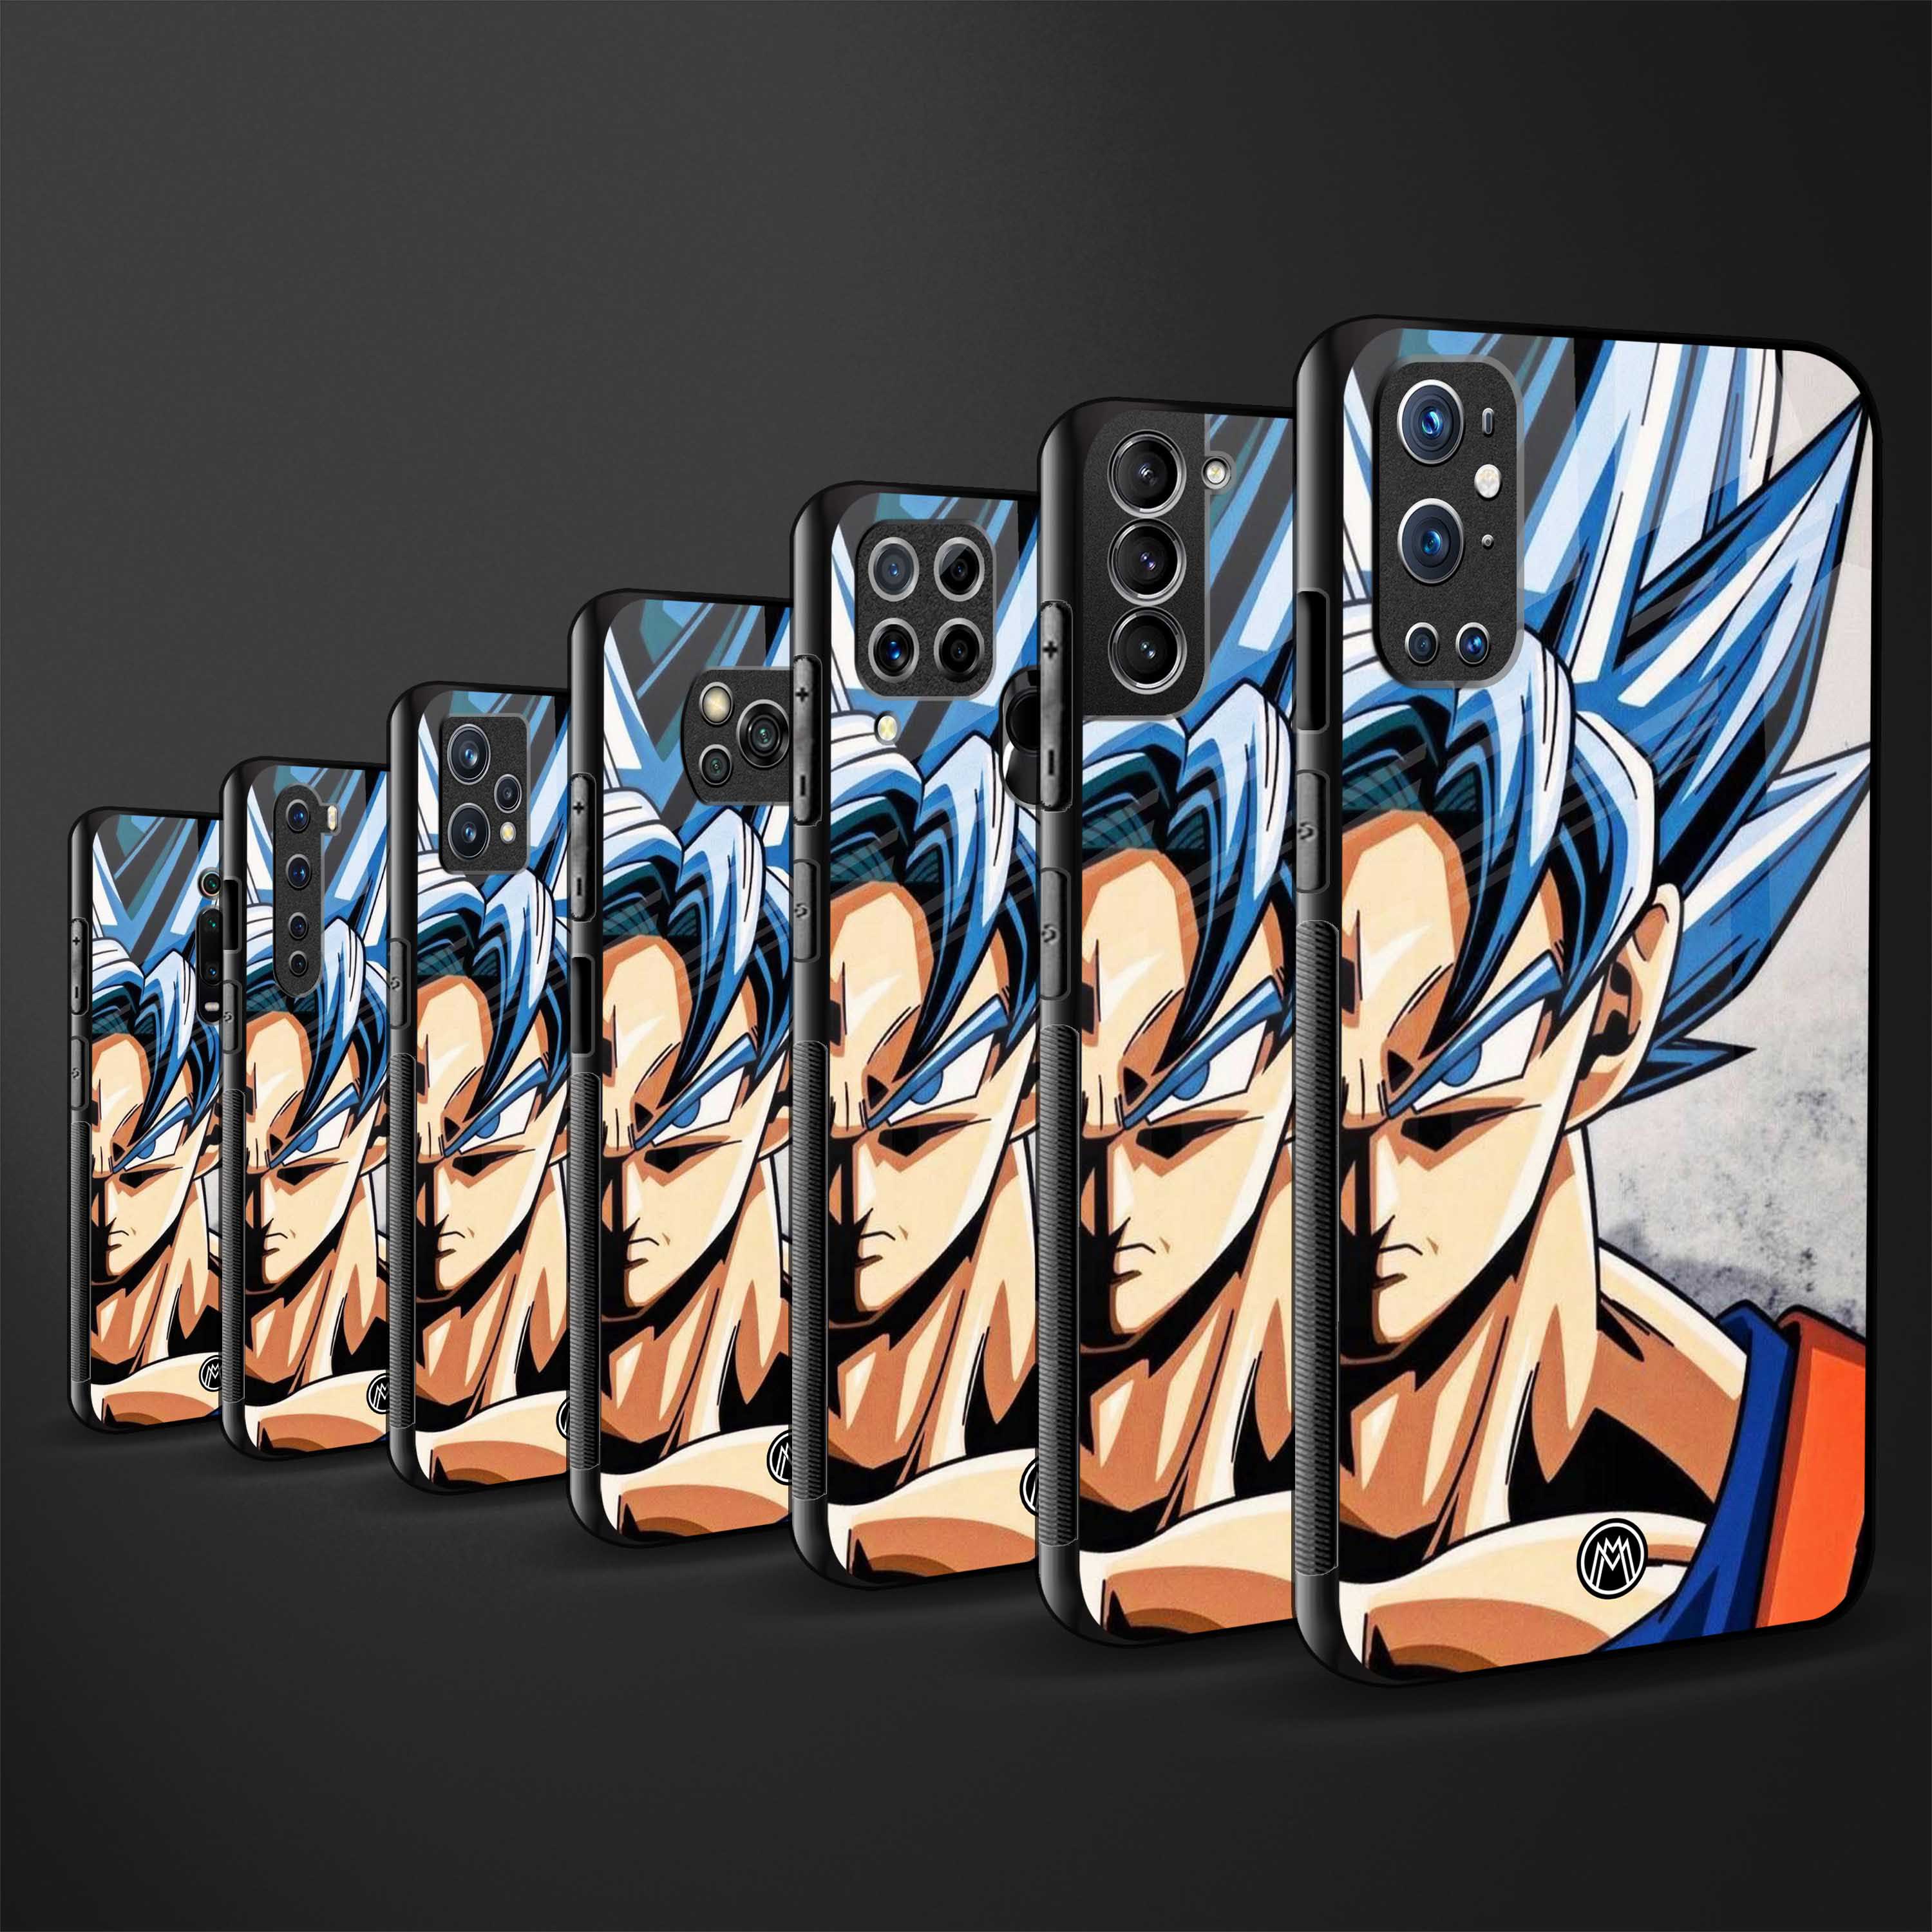 Goku Dragon Ball Z Anime Phone Cover for iPhone XR  Glass Case   Mymerchandize